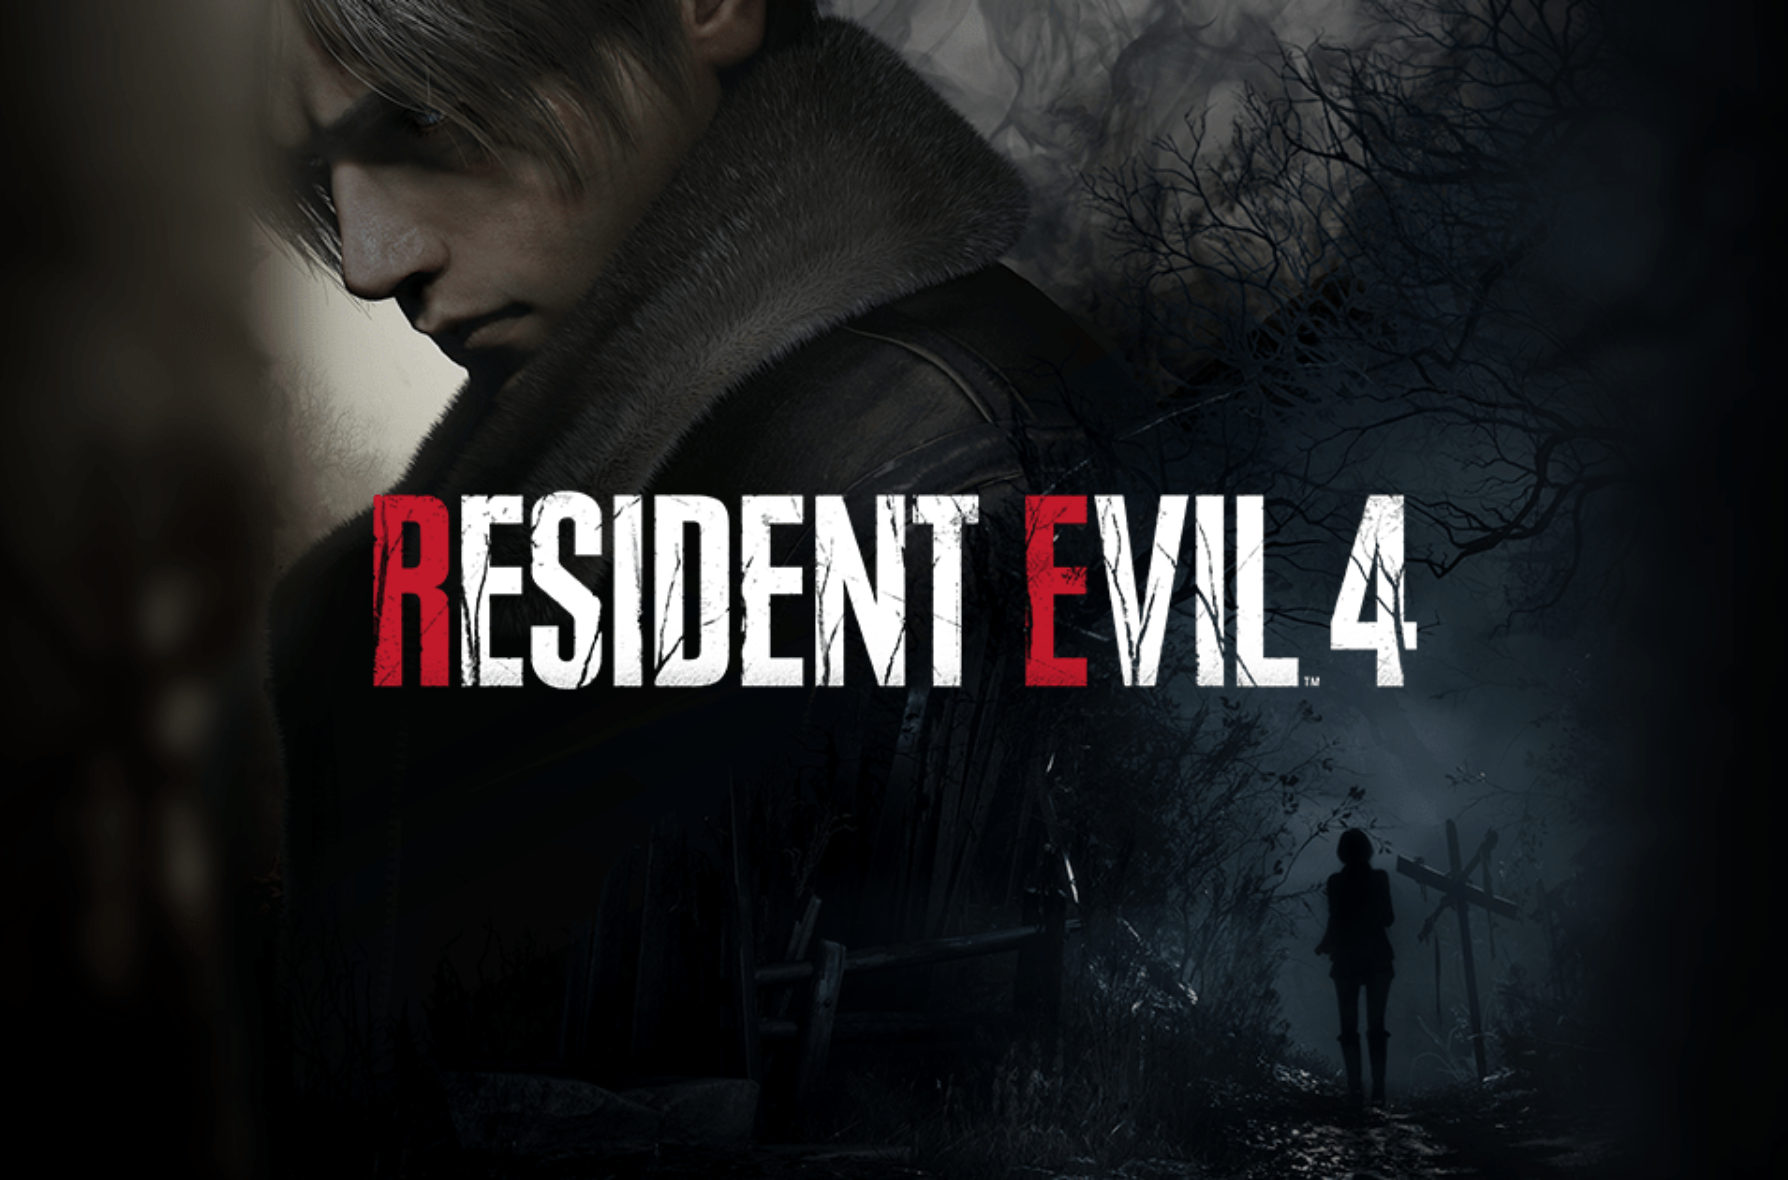  image for Resident Evil 4, showcasing protagonist Leon S. Kennedy, armed with a handgun and flashlight, amidst a dark and gloomy village setting. Menacing villagers with hostile expressions and primitive weapons lurk in the shadows, ready to attack